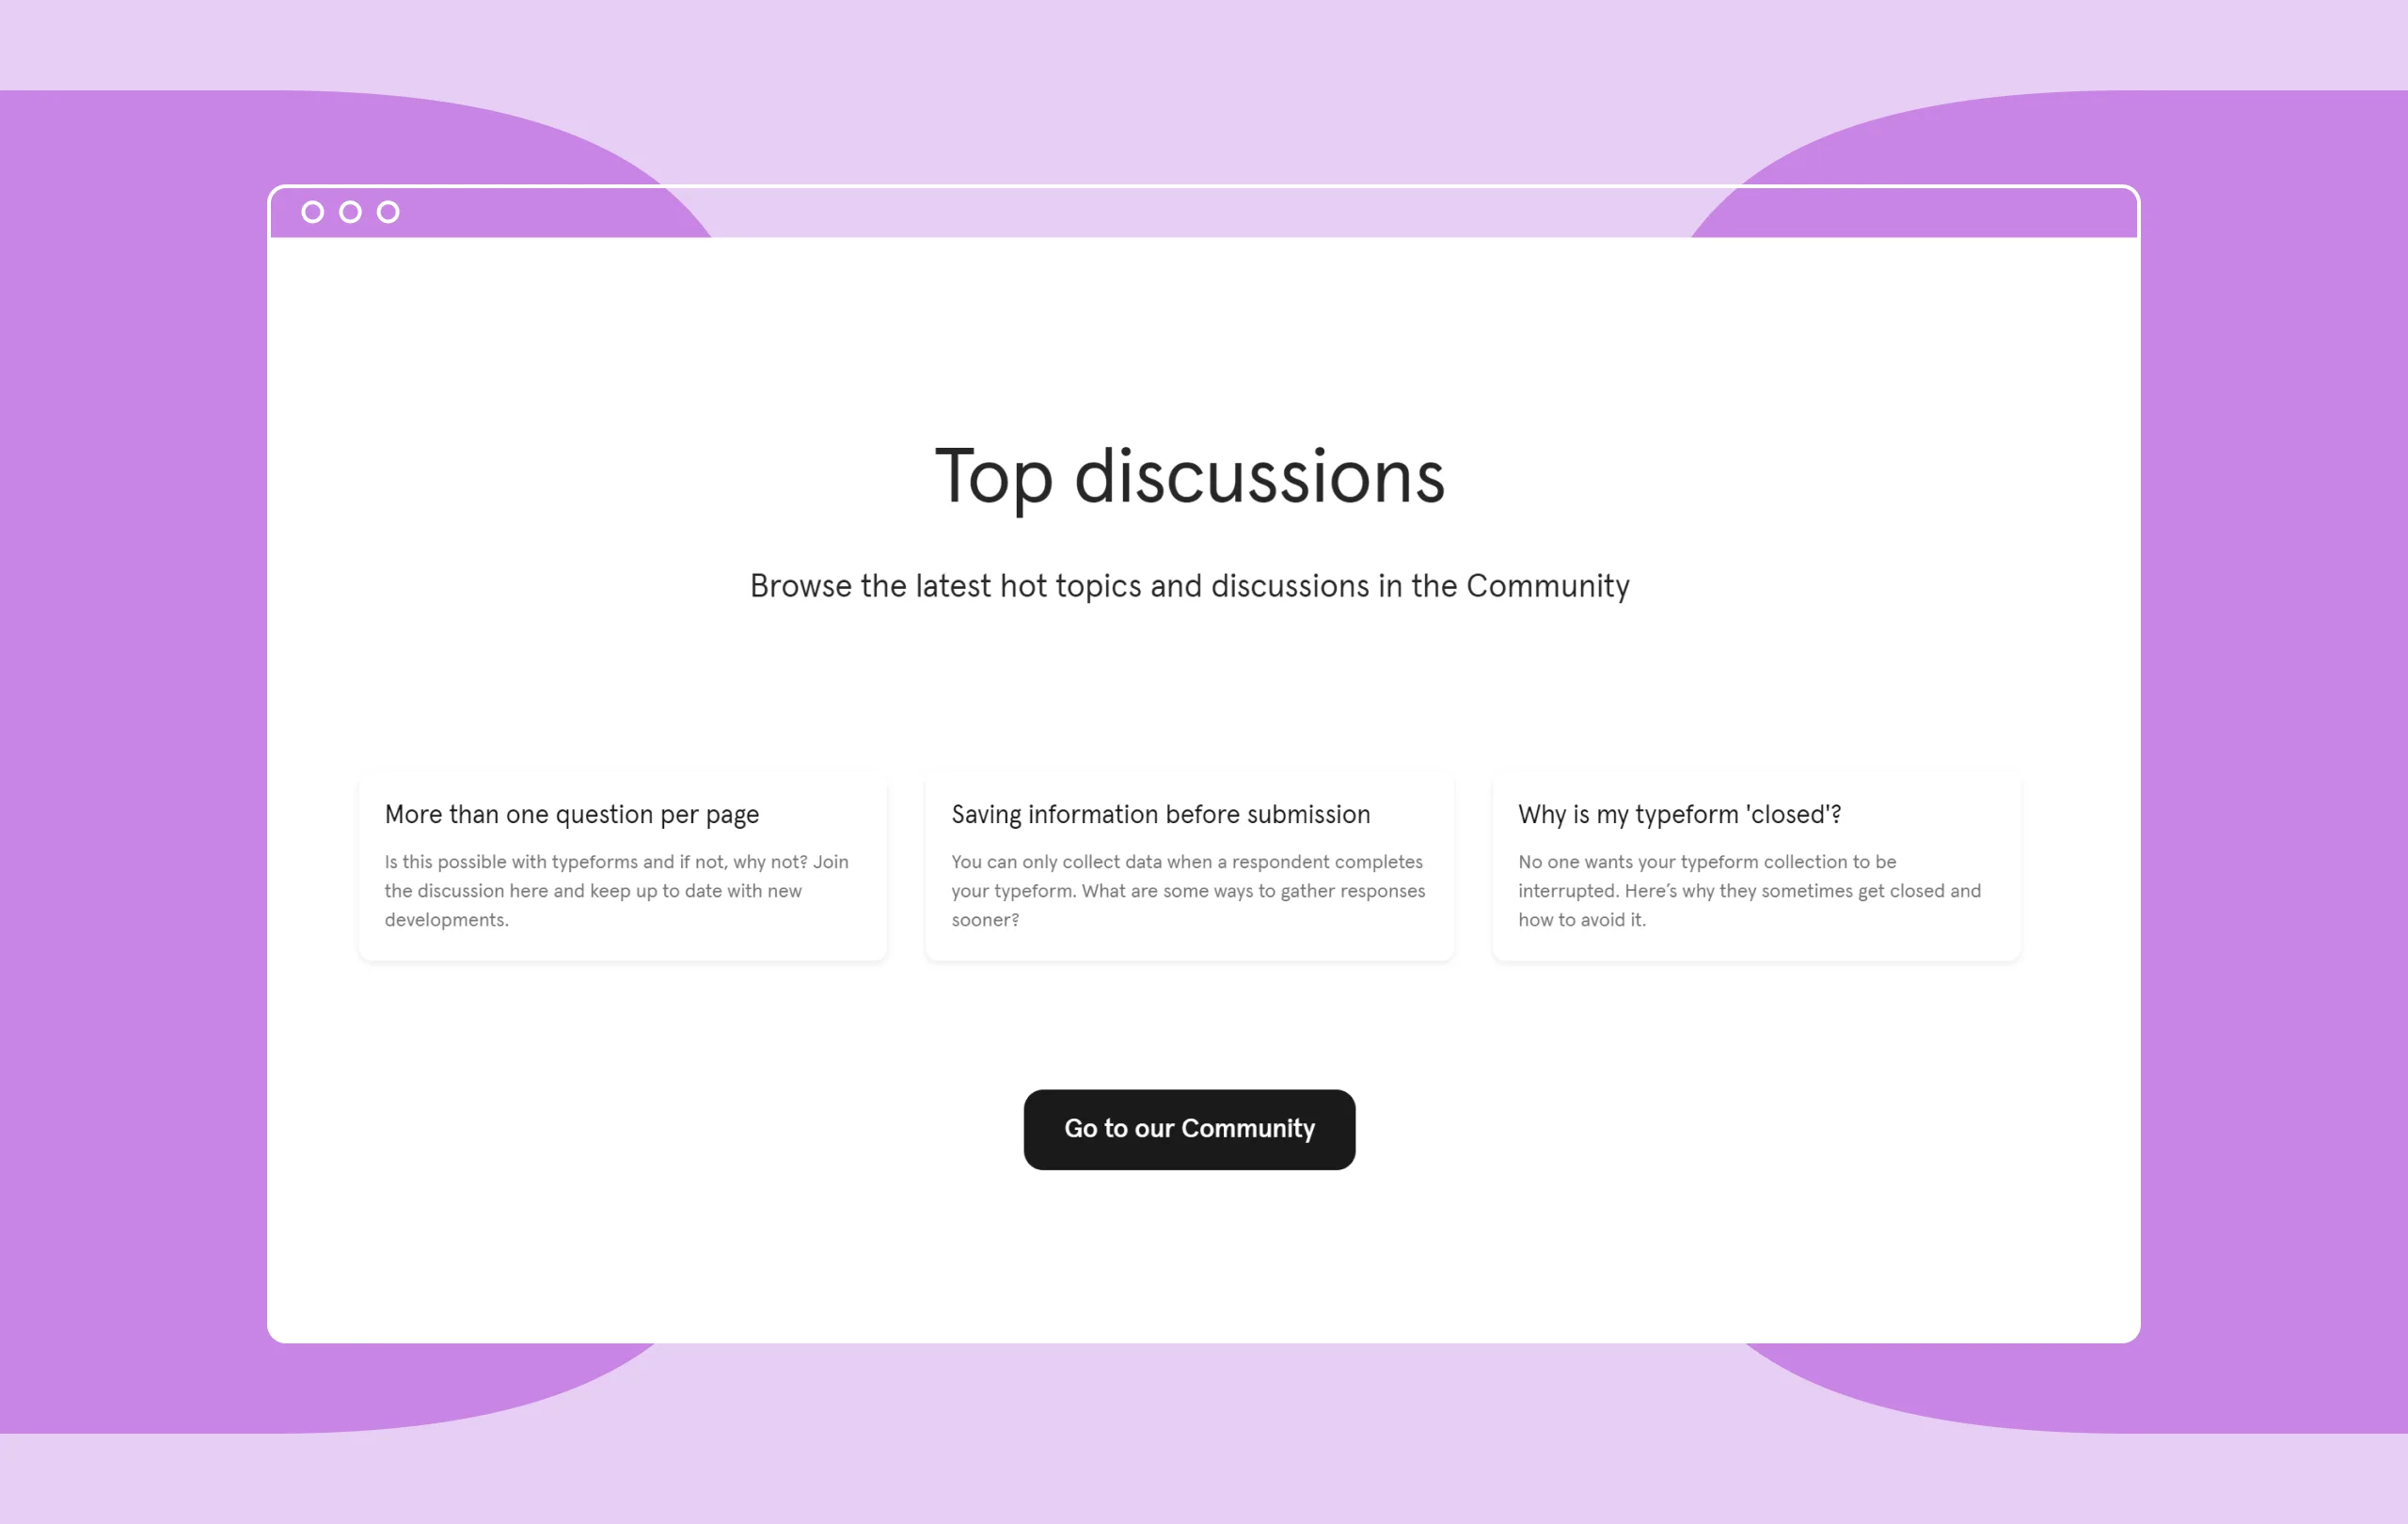 Example of Typeform's help center discussion board.